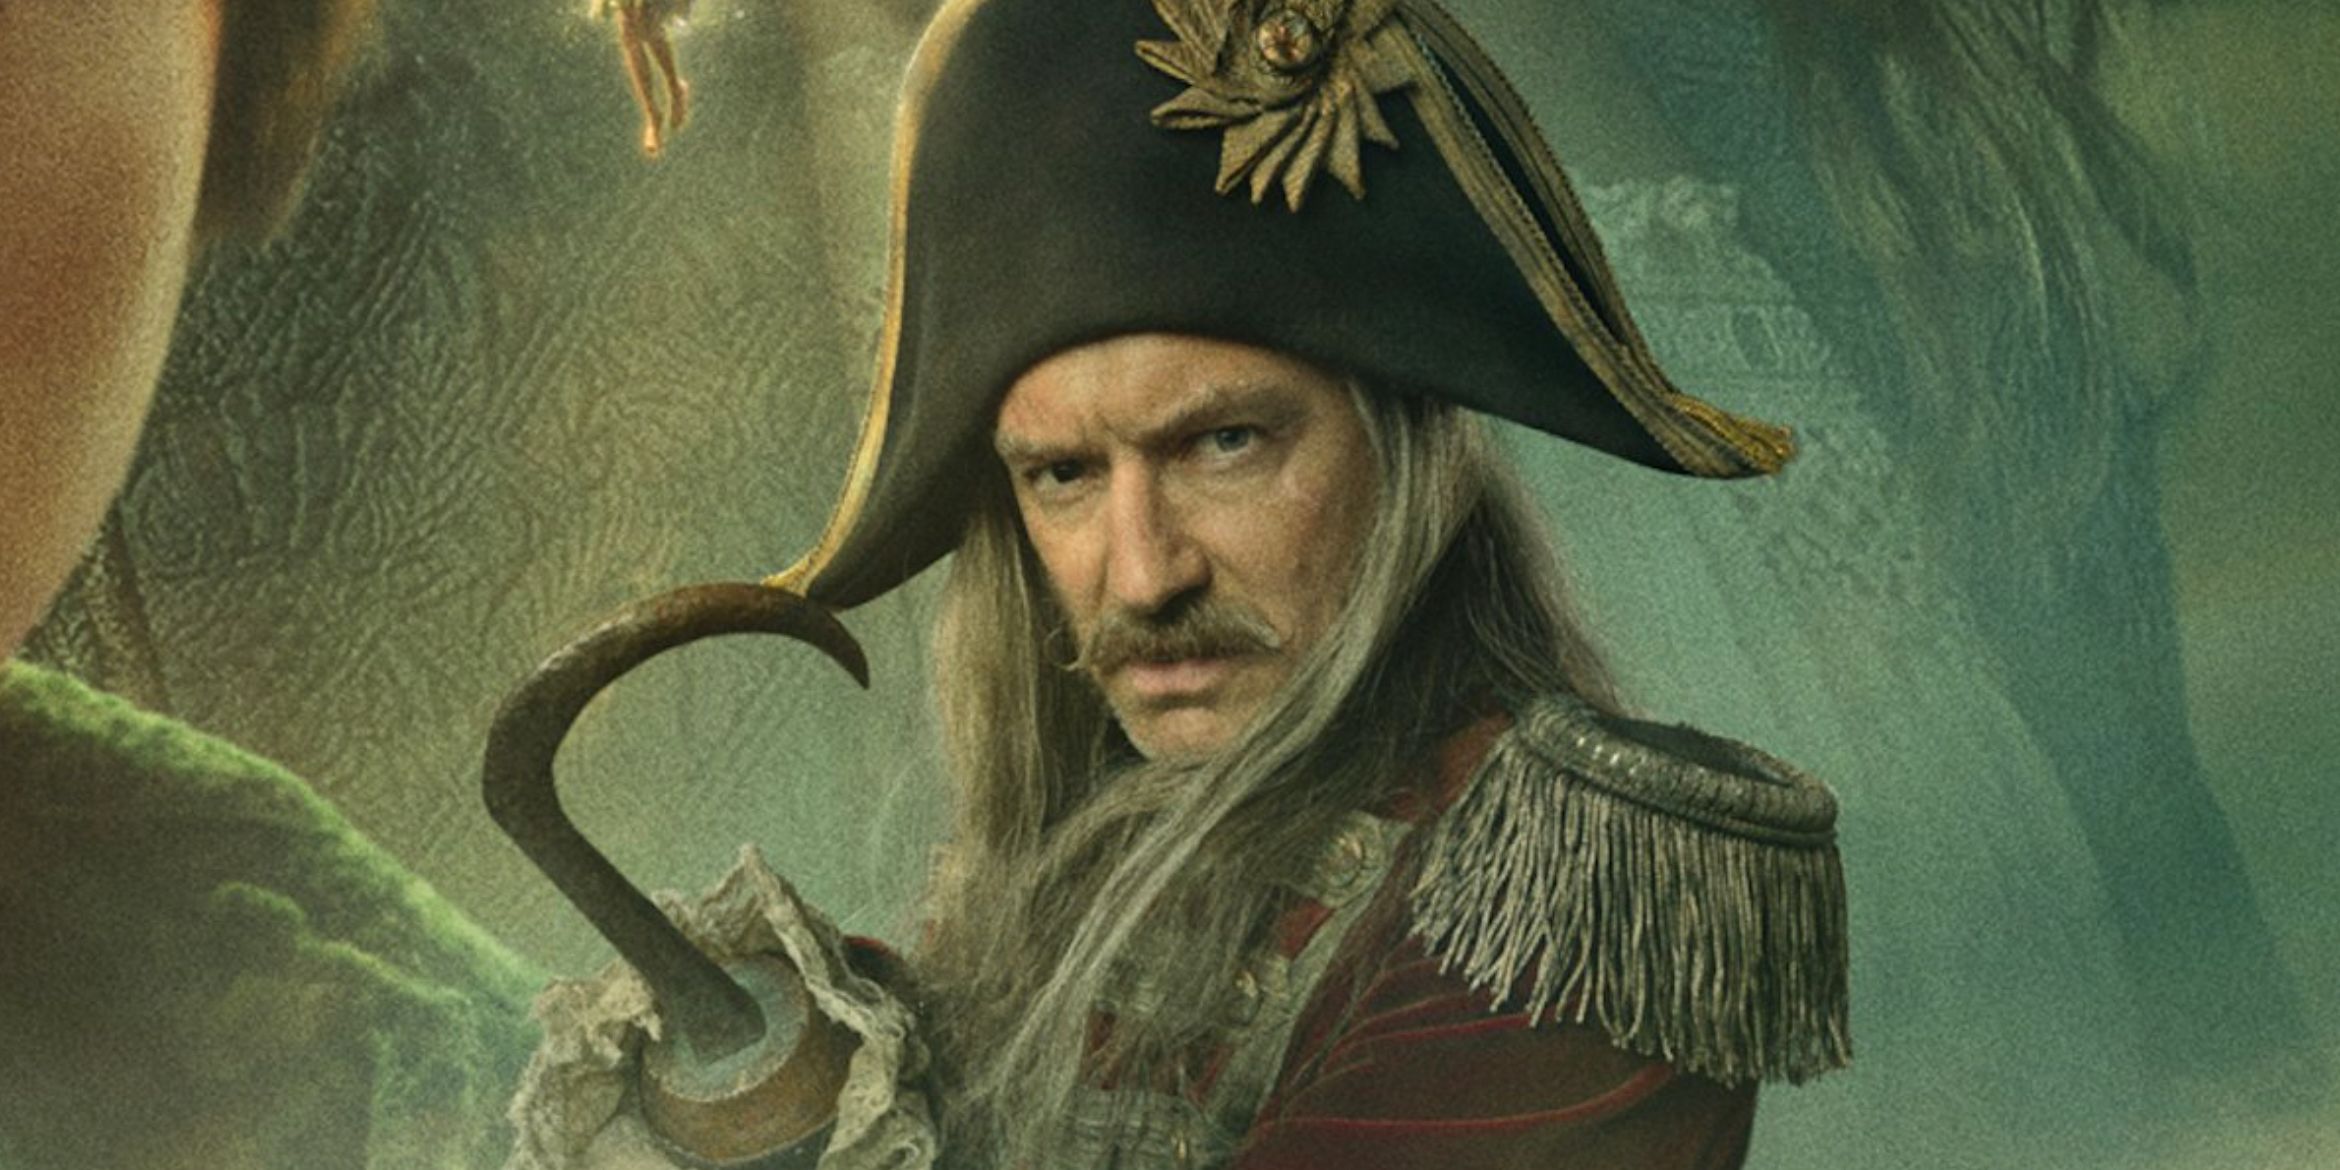 Jude Law as Captain Hook in the Peter Pan and Wendy poster